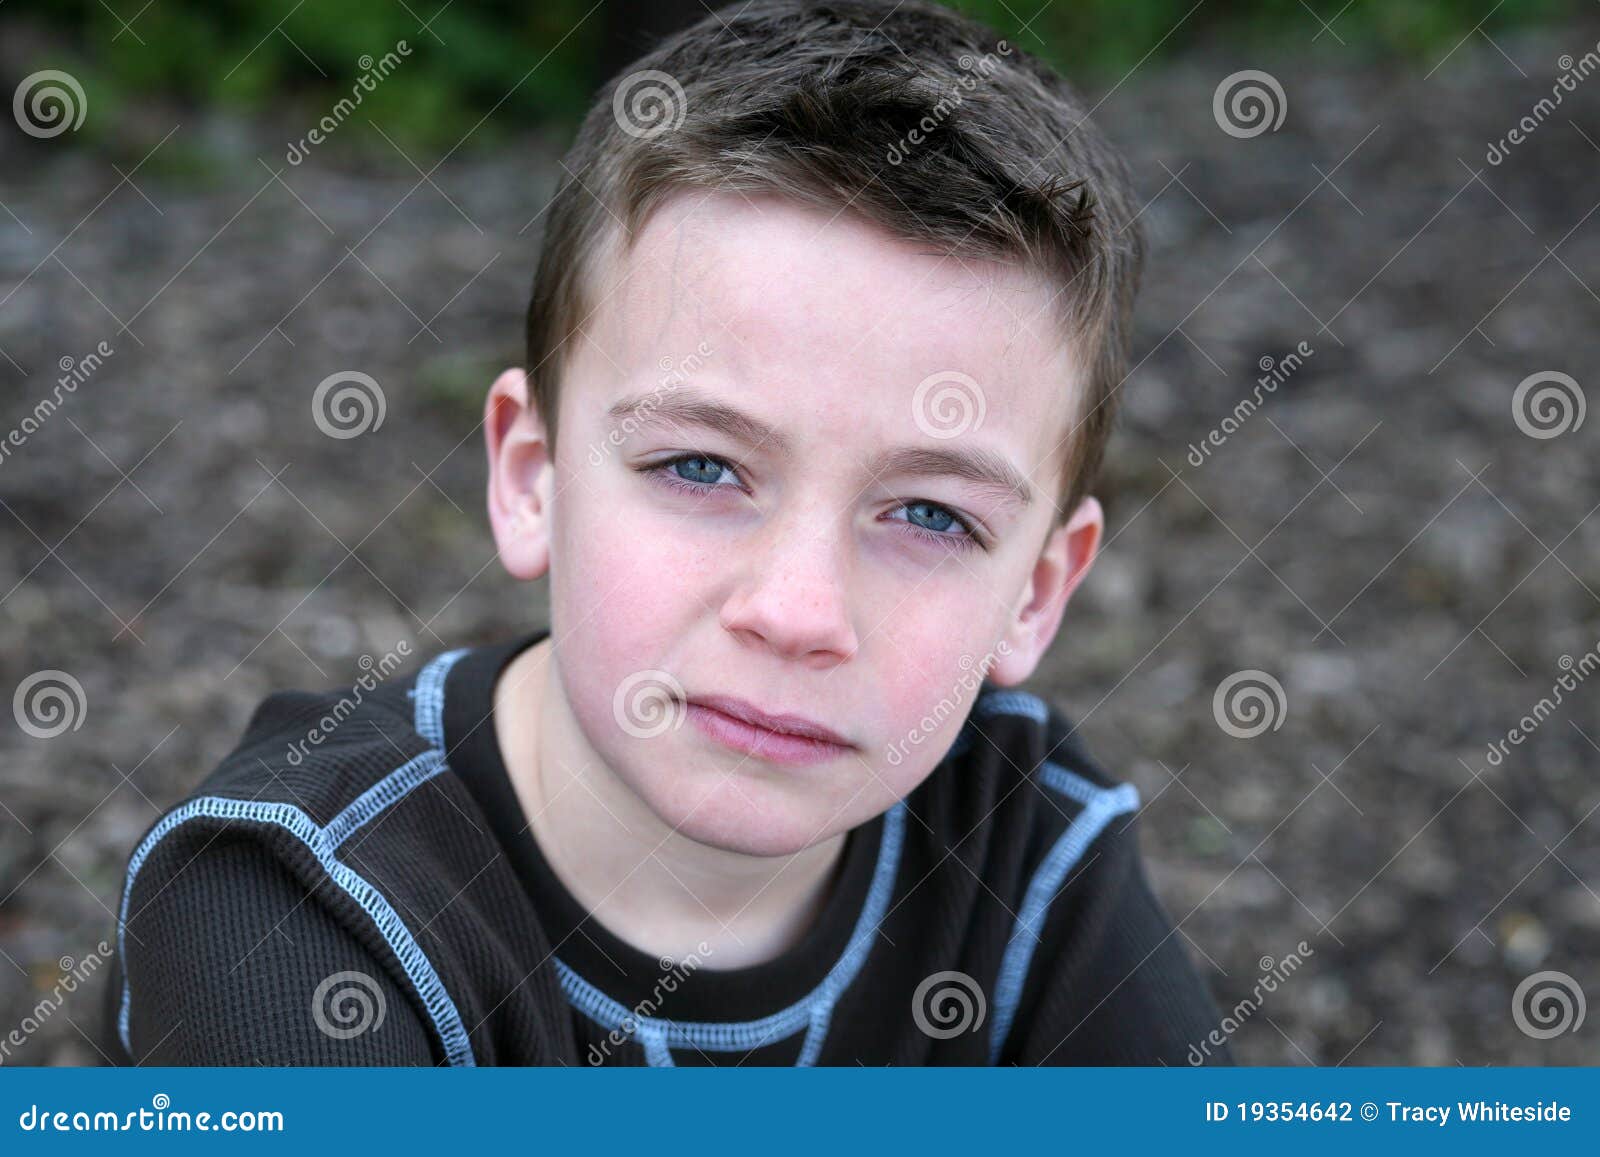 Young Caucasian Boy Smiling Stock Photo - Image of youth, young: 19354642